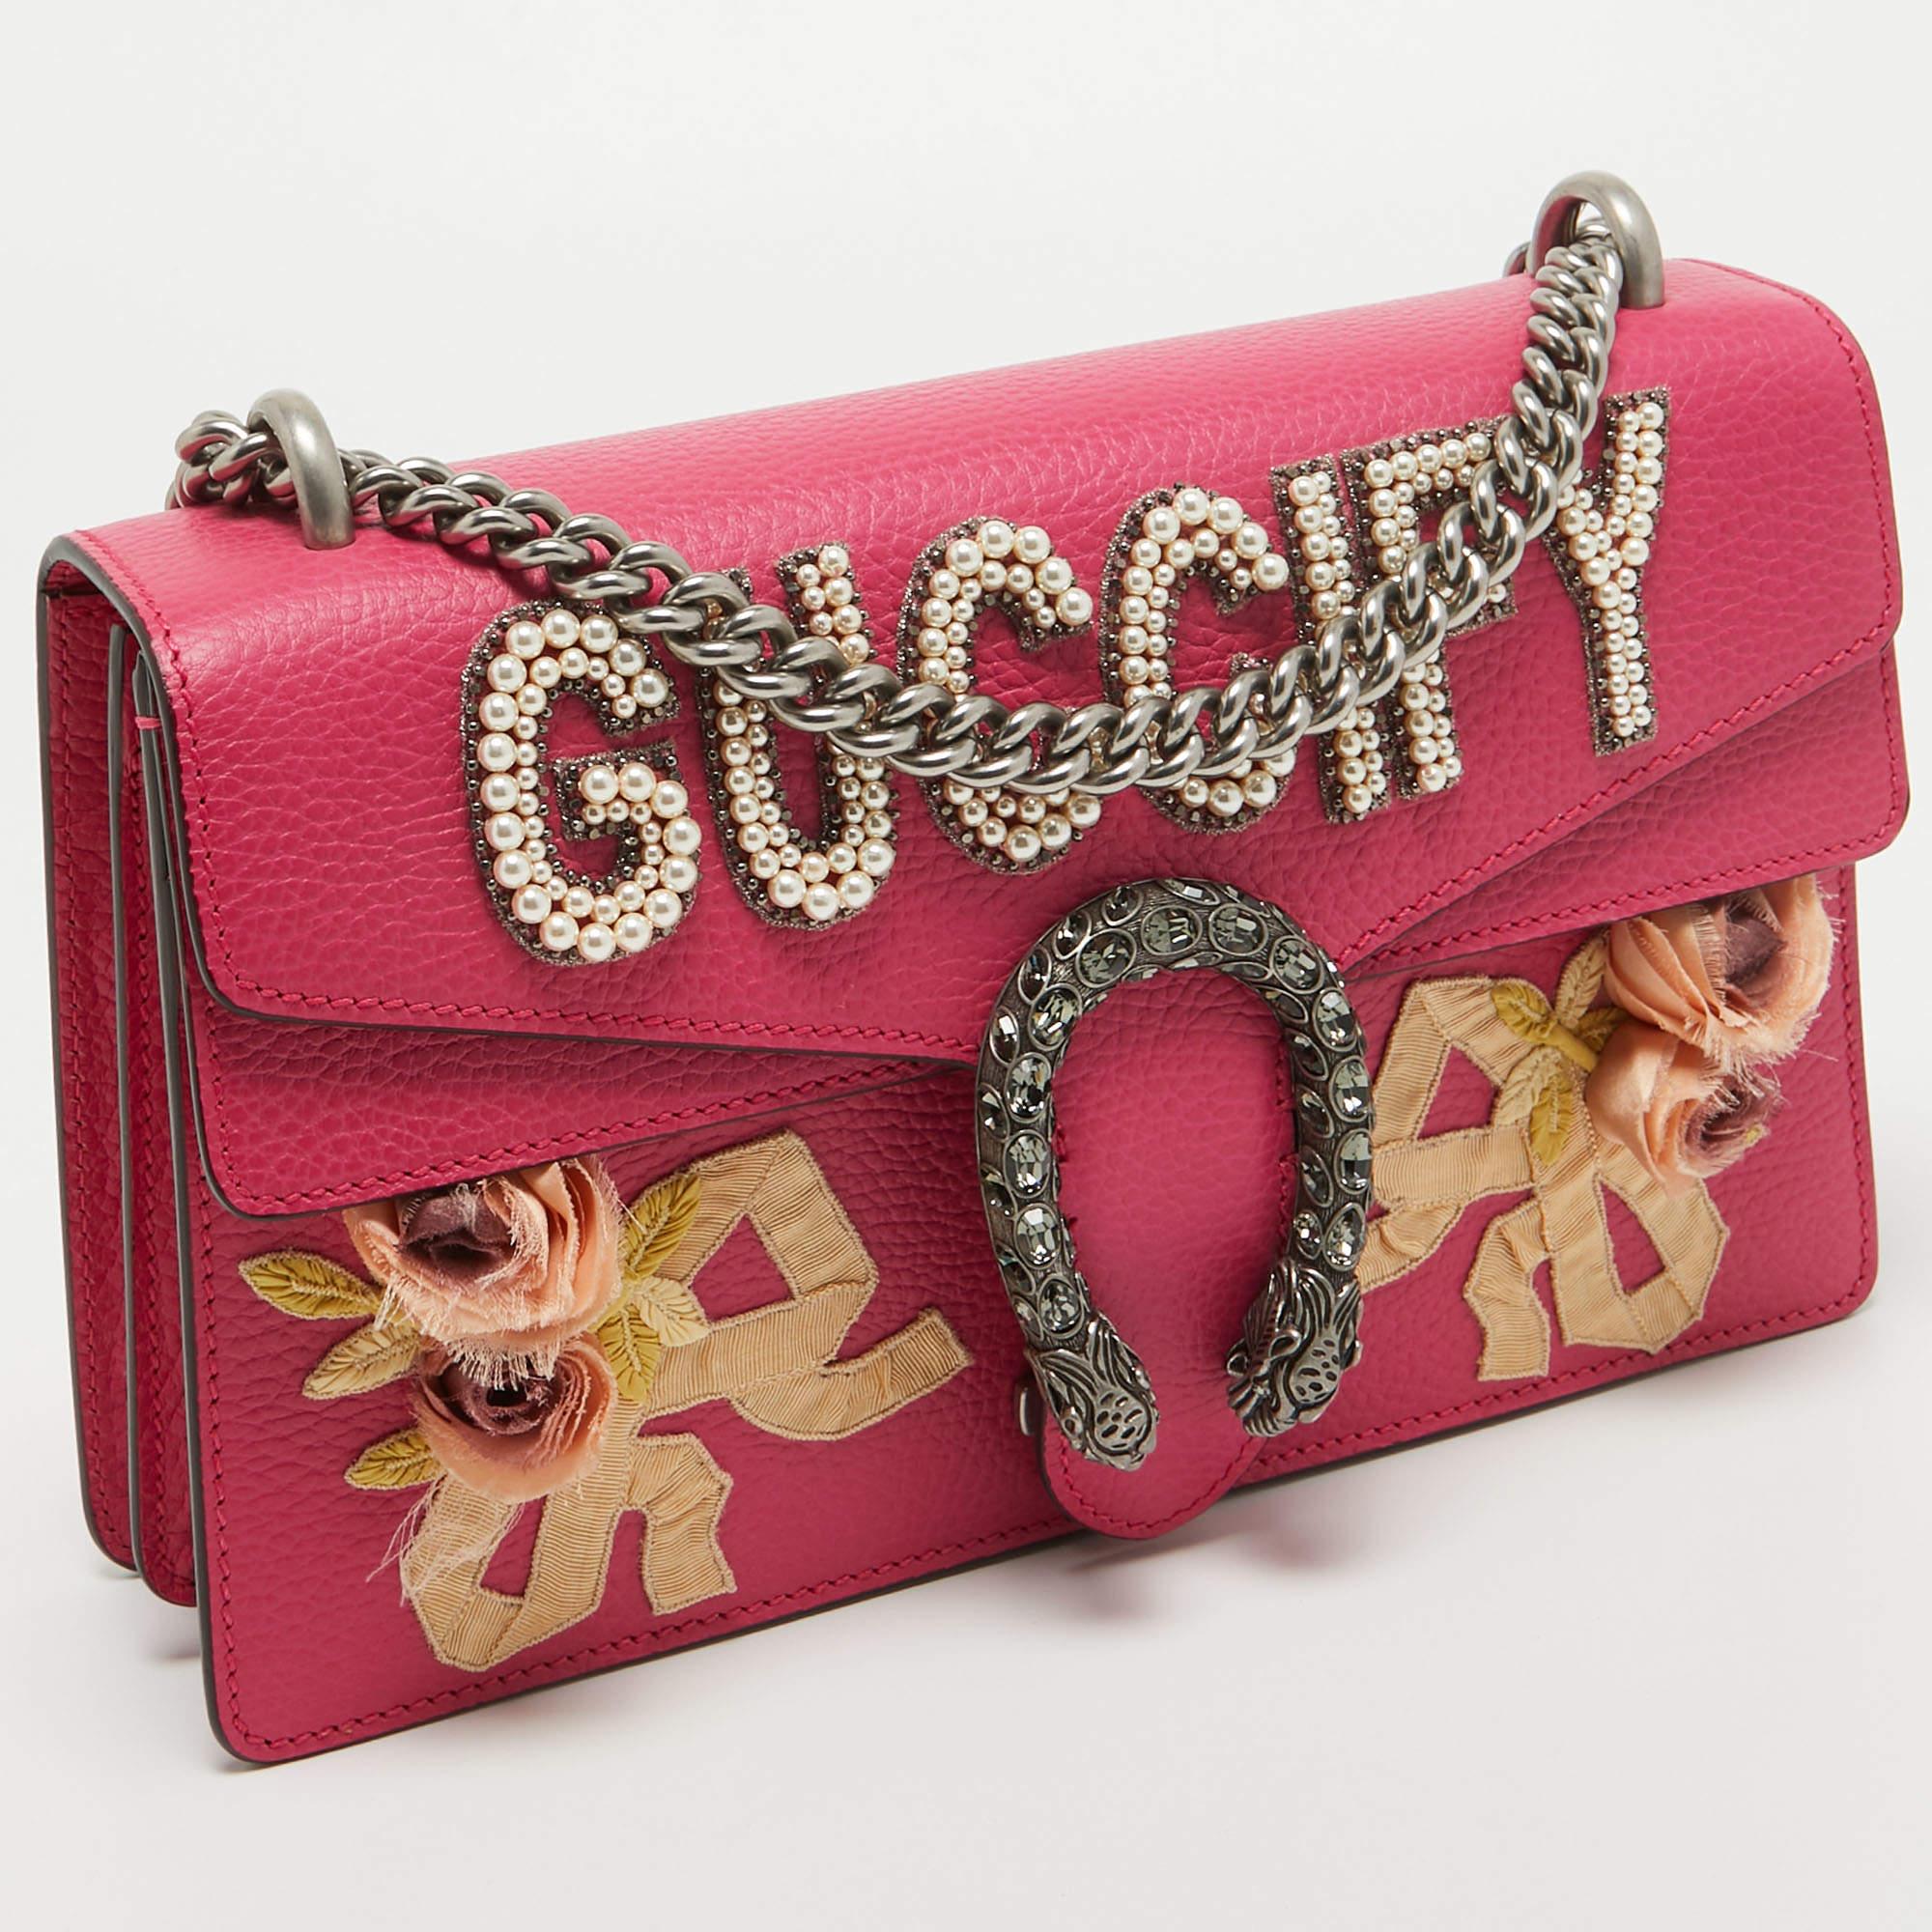 Gucci Magenta Leather Small Guccify Pearl Embellished Dionysus Shoulder Bag For Sale 3